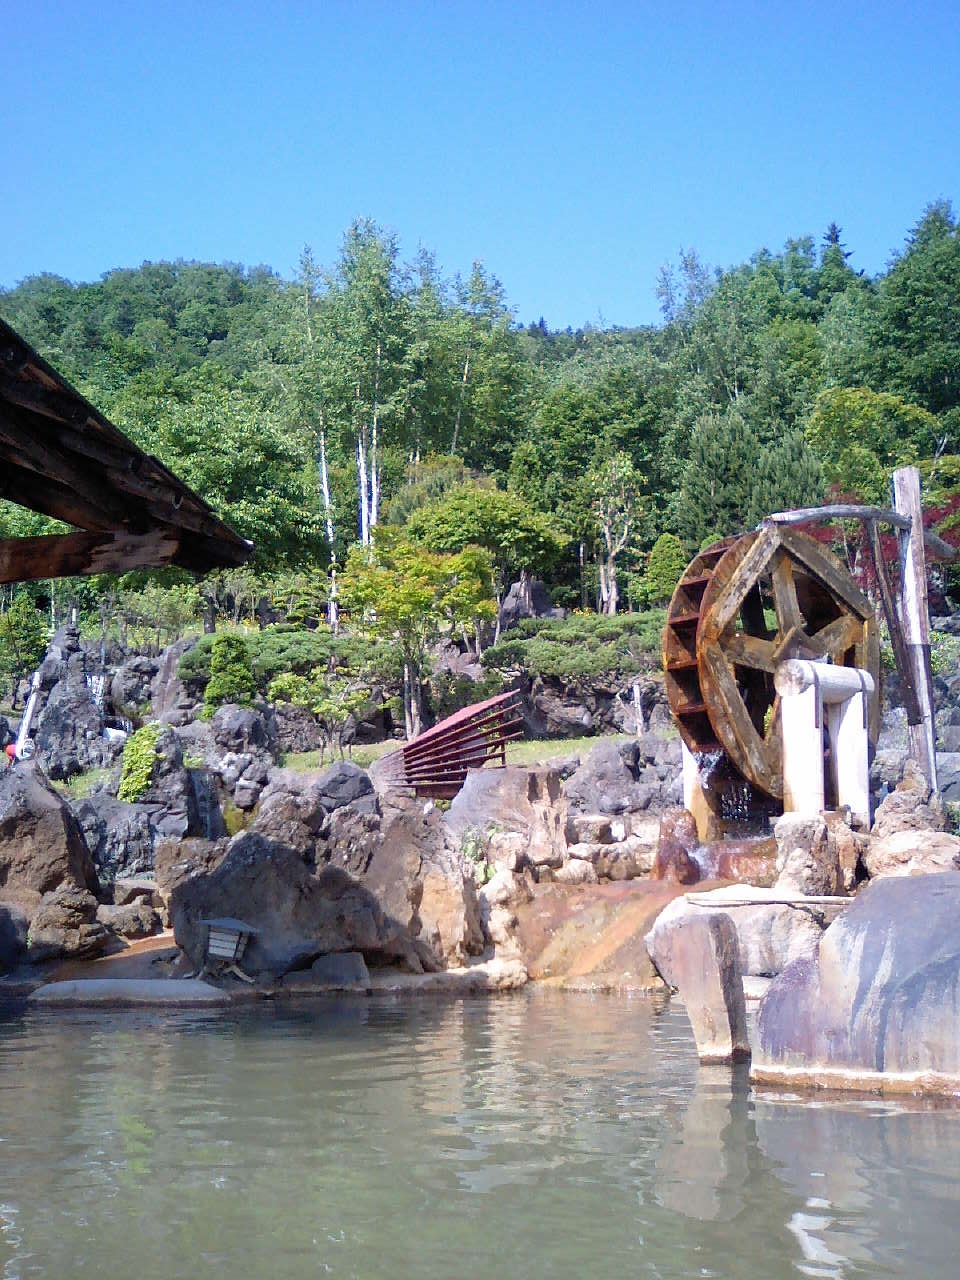 Another rotenburo shot, showing the decorative faux waterwheel and garden.